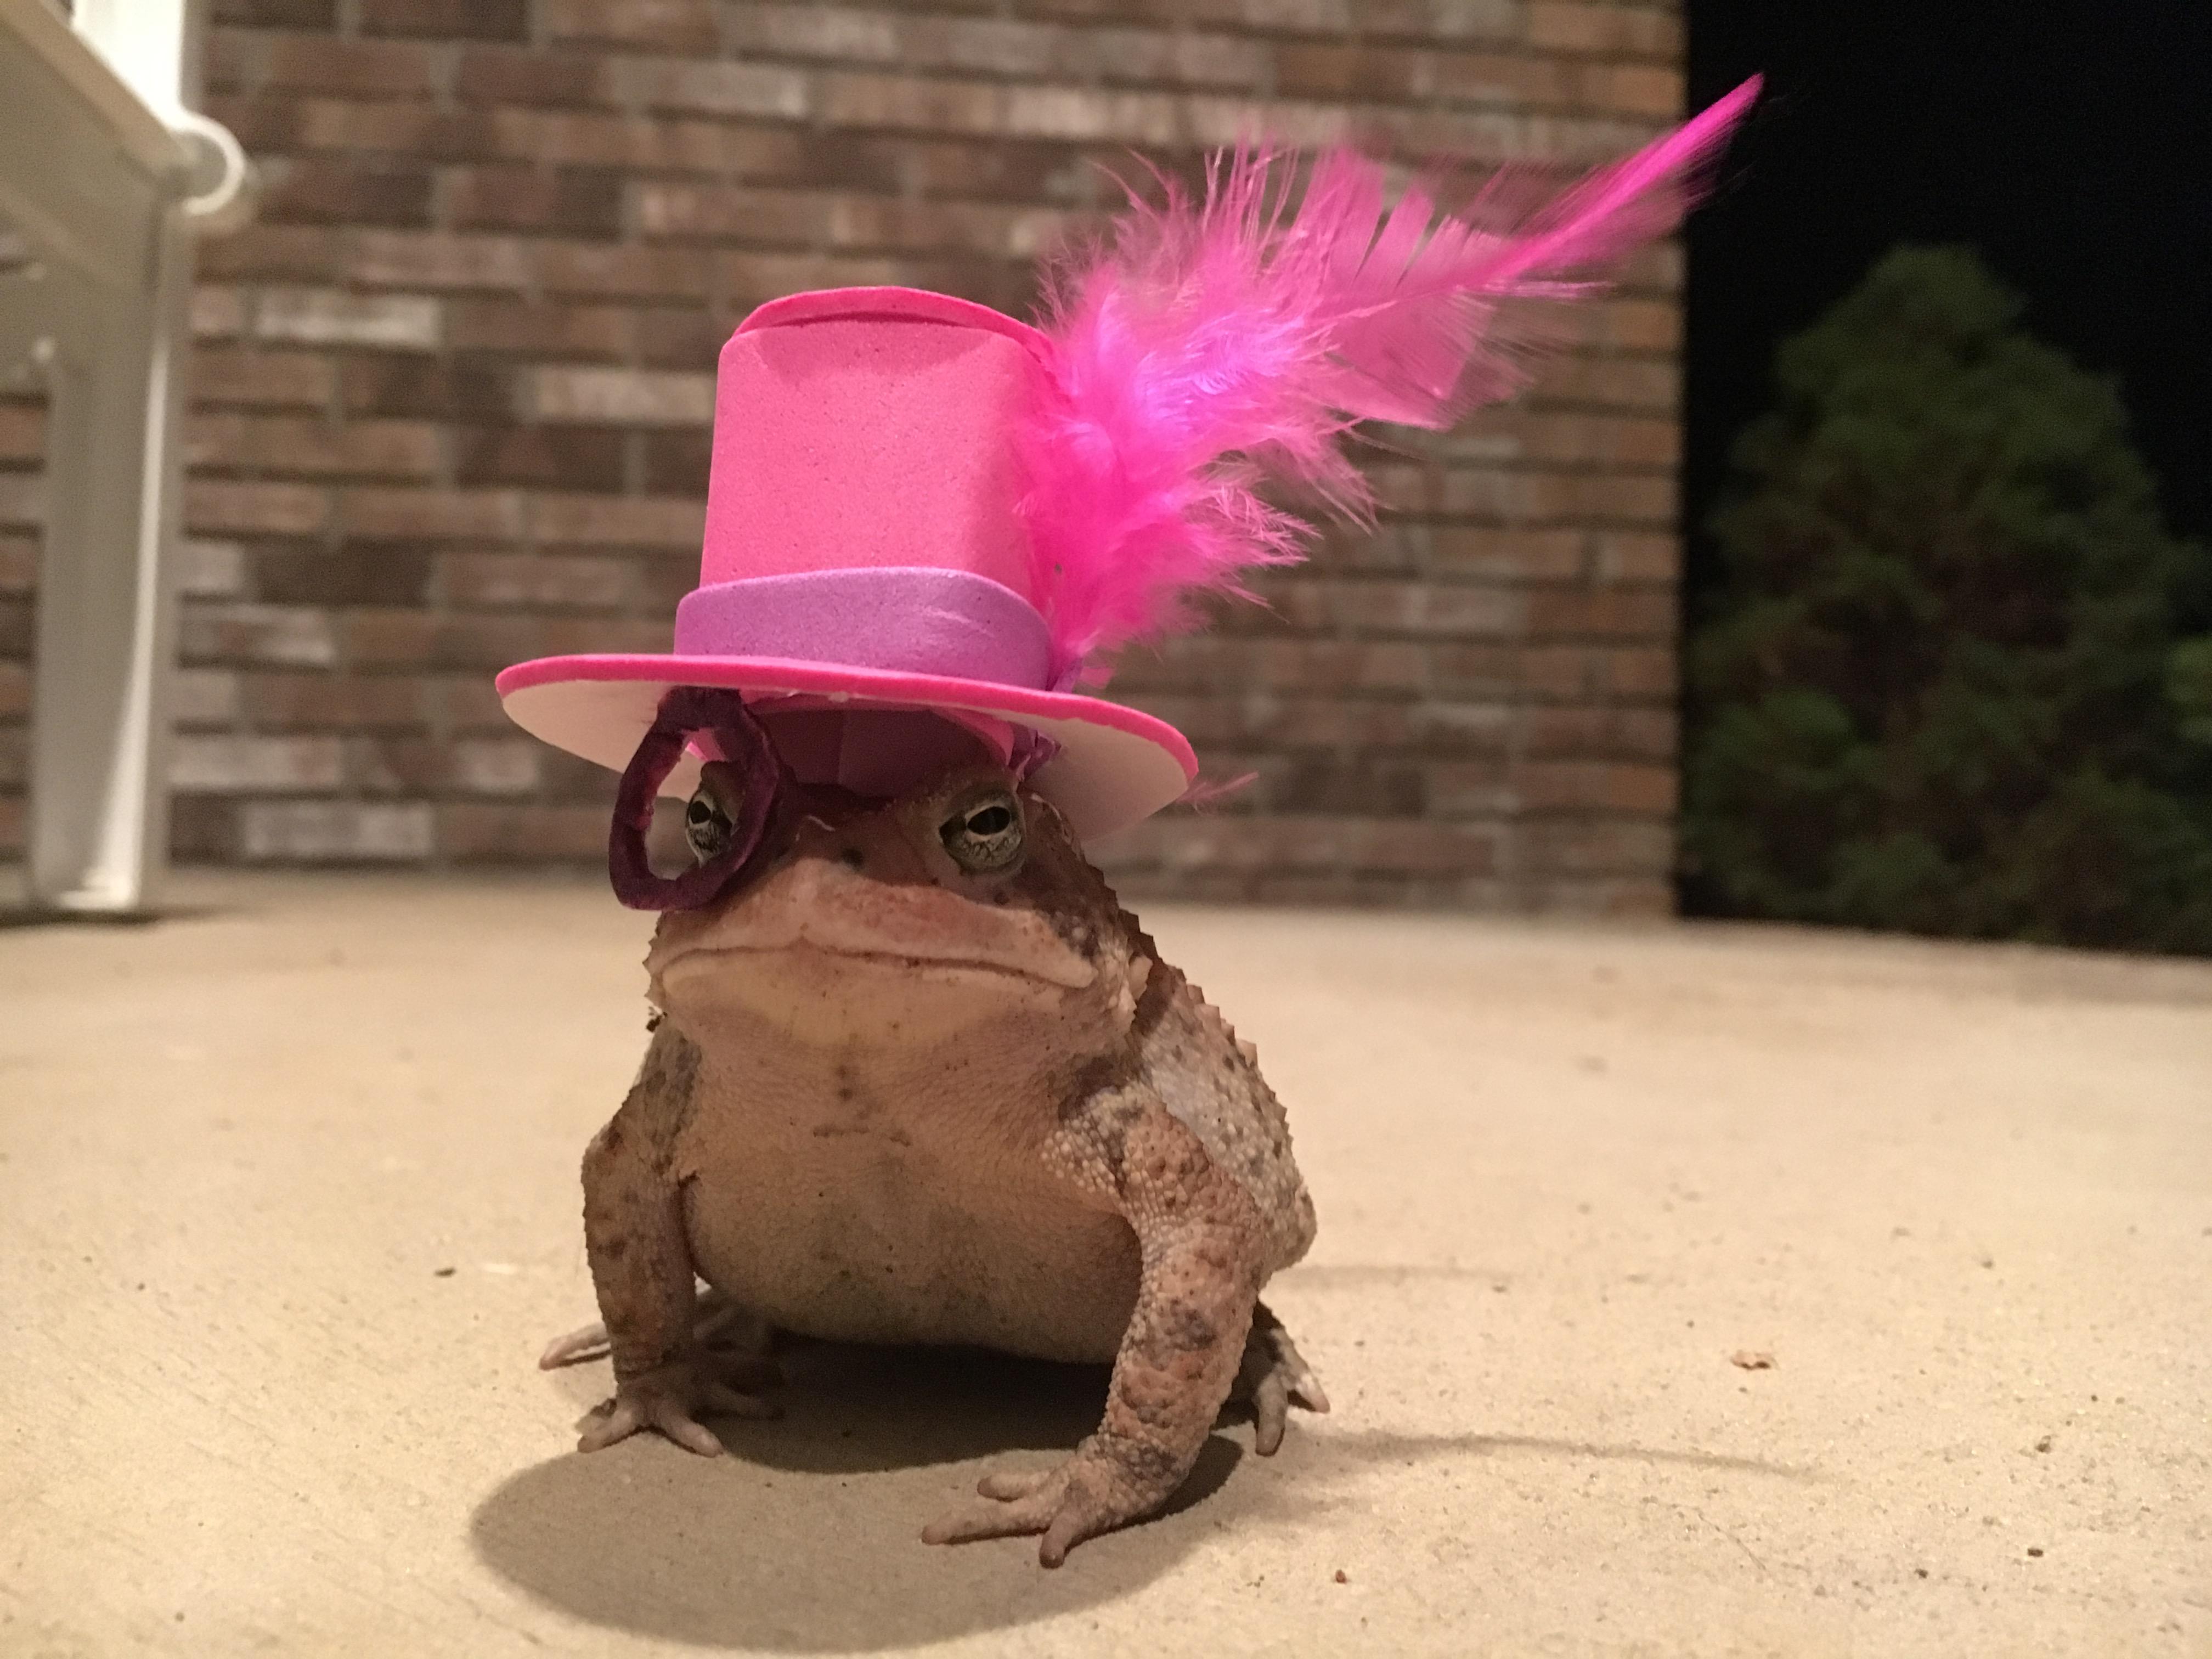 Man makes cute hats for toad that visits his porch 4